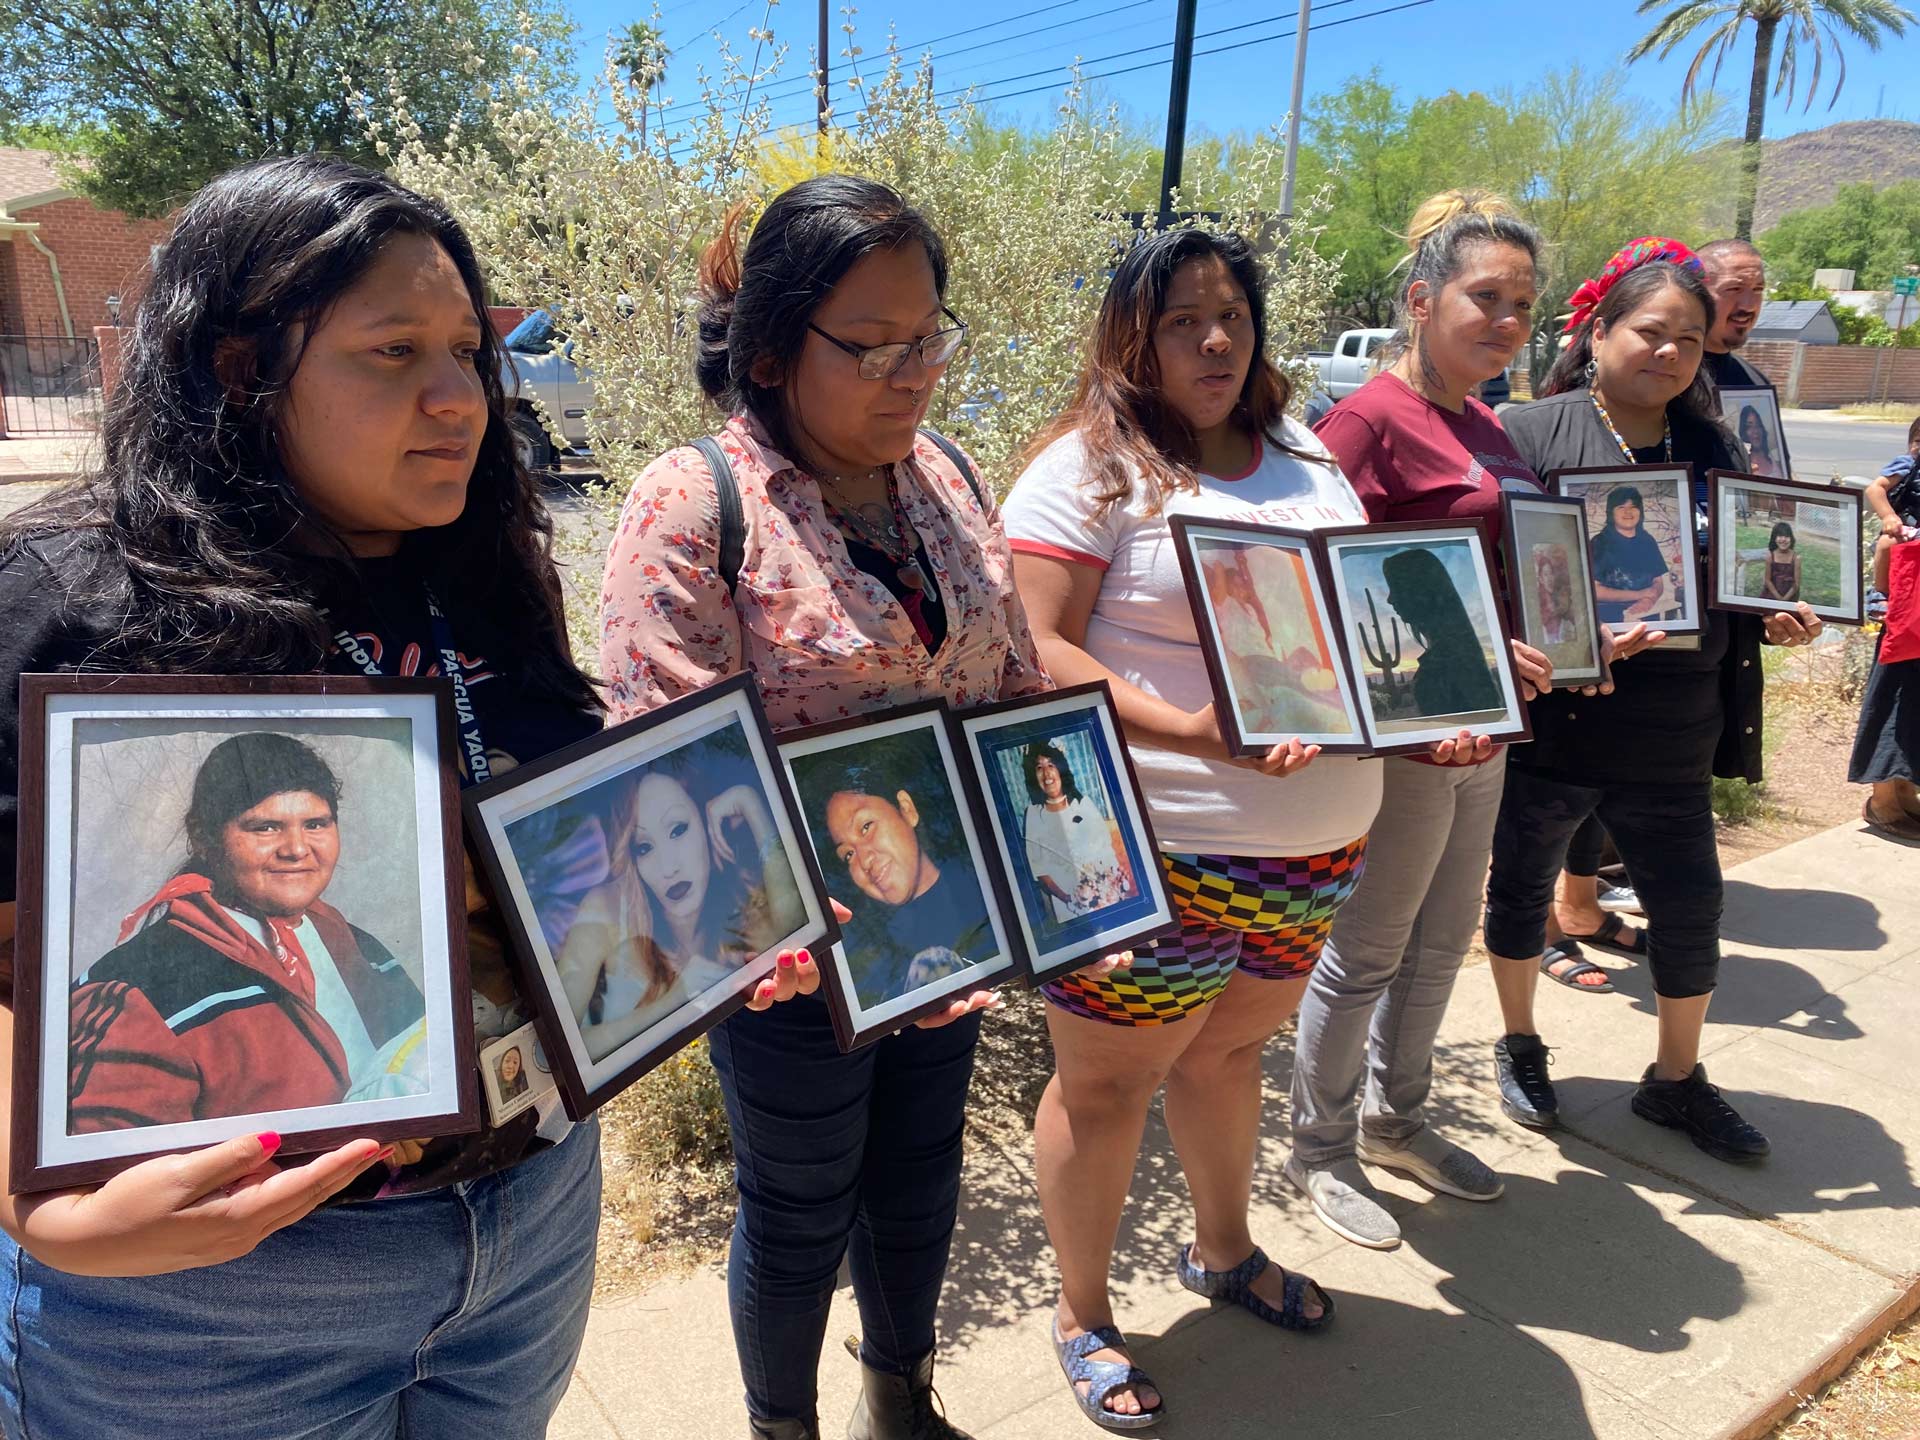 Women hold photos of loved ones during a press conference on missing and murdered indigenous women on Friday, May 5 at the city council Ward 1 office.
